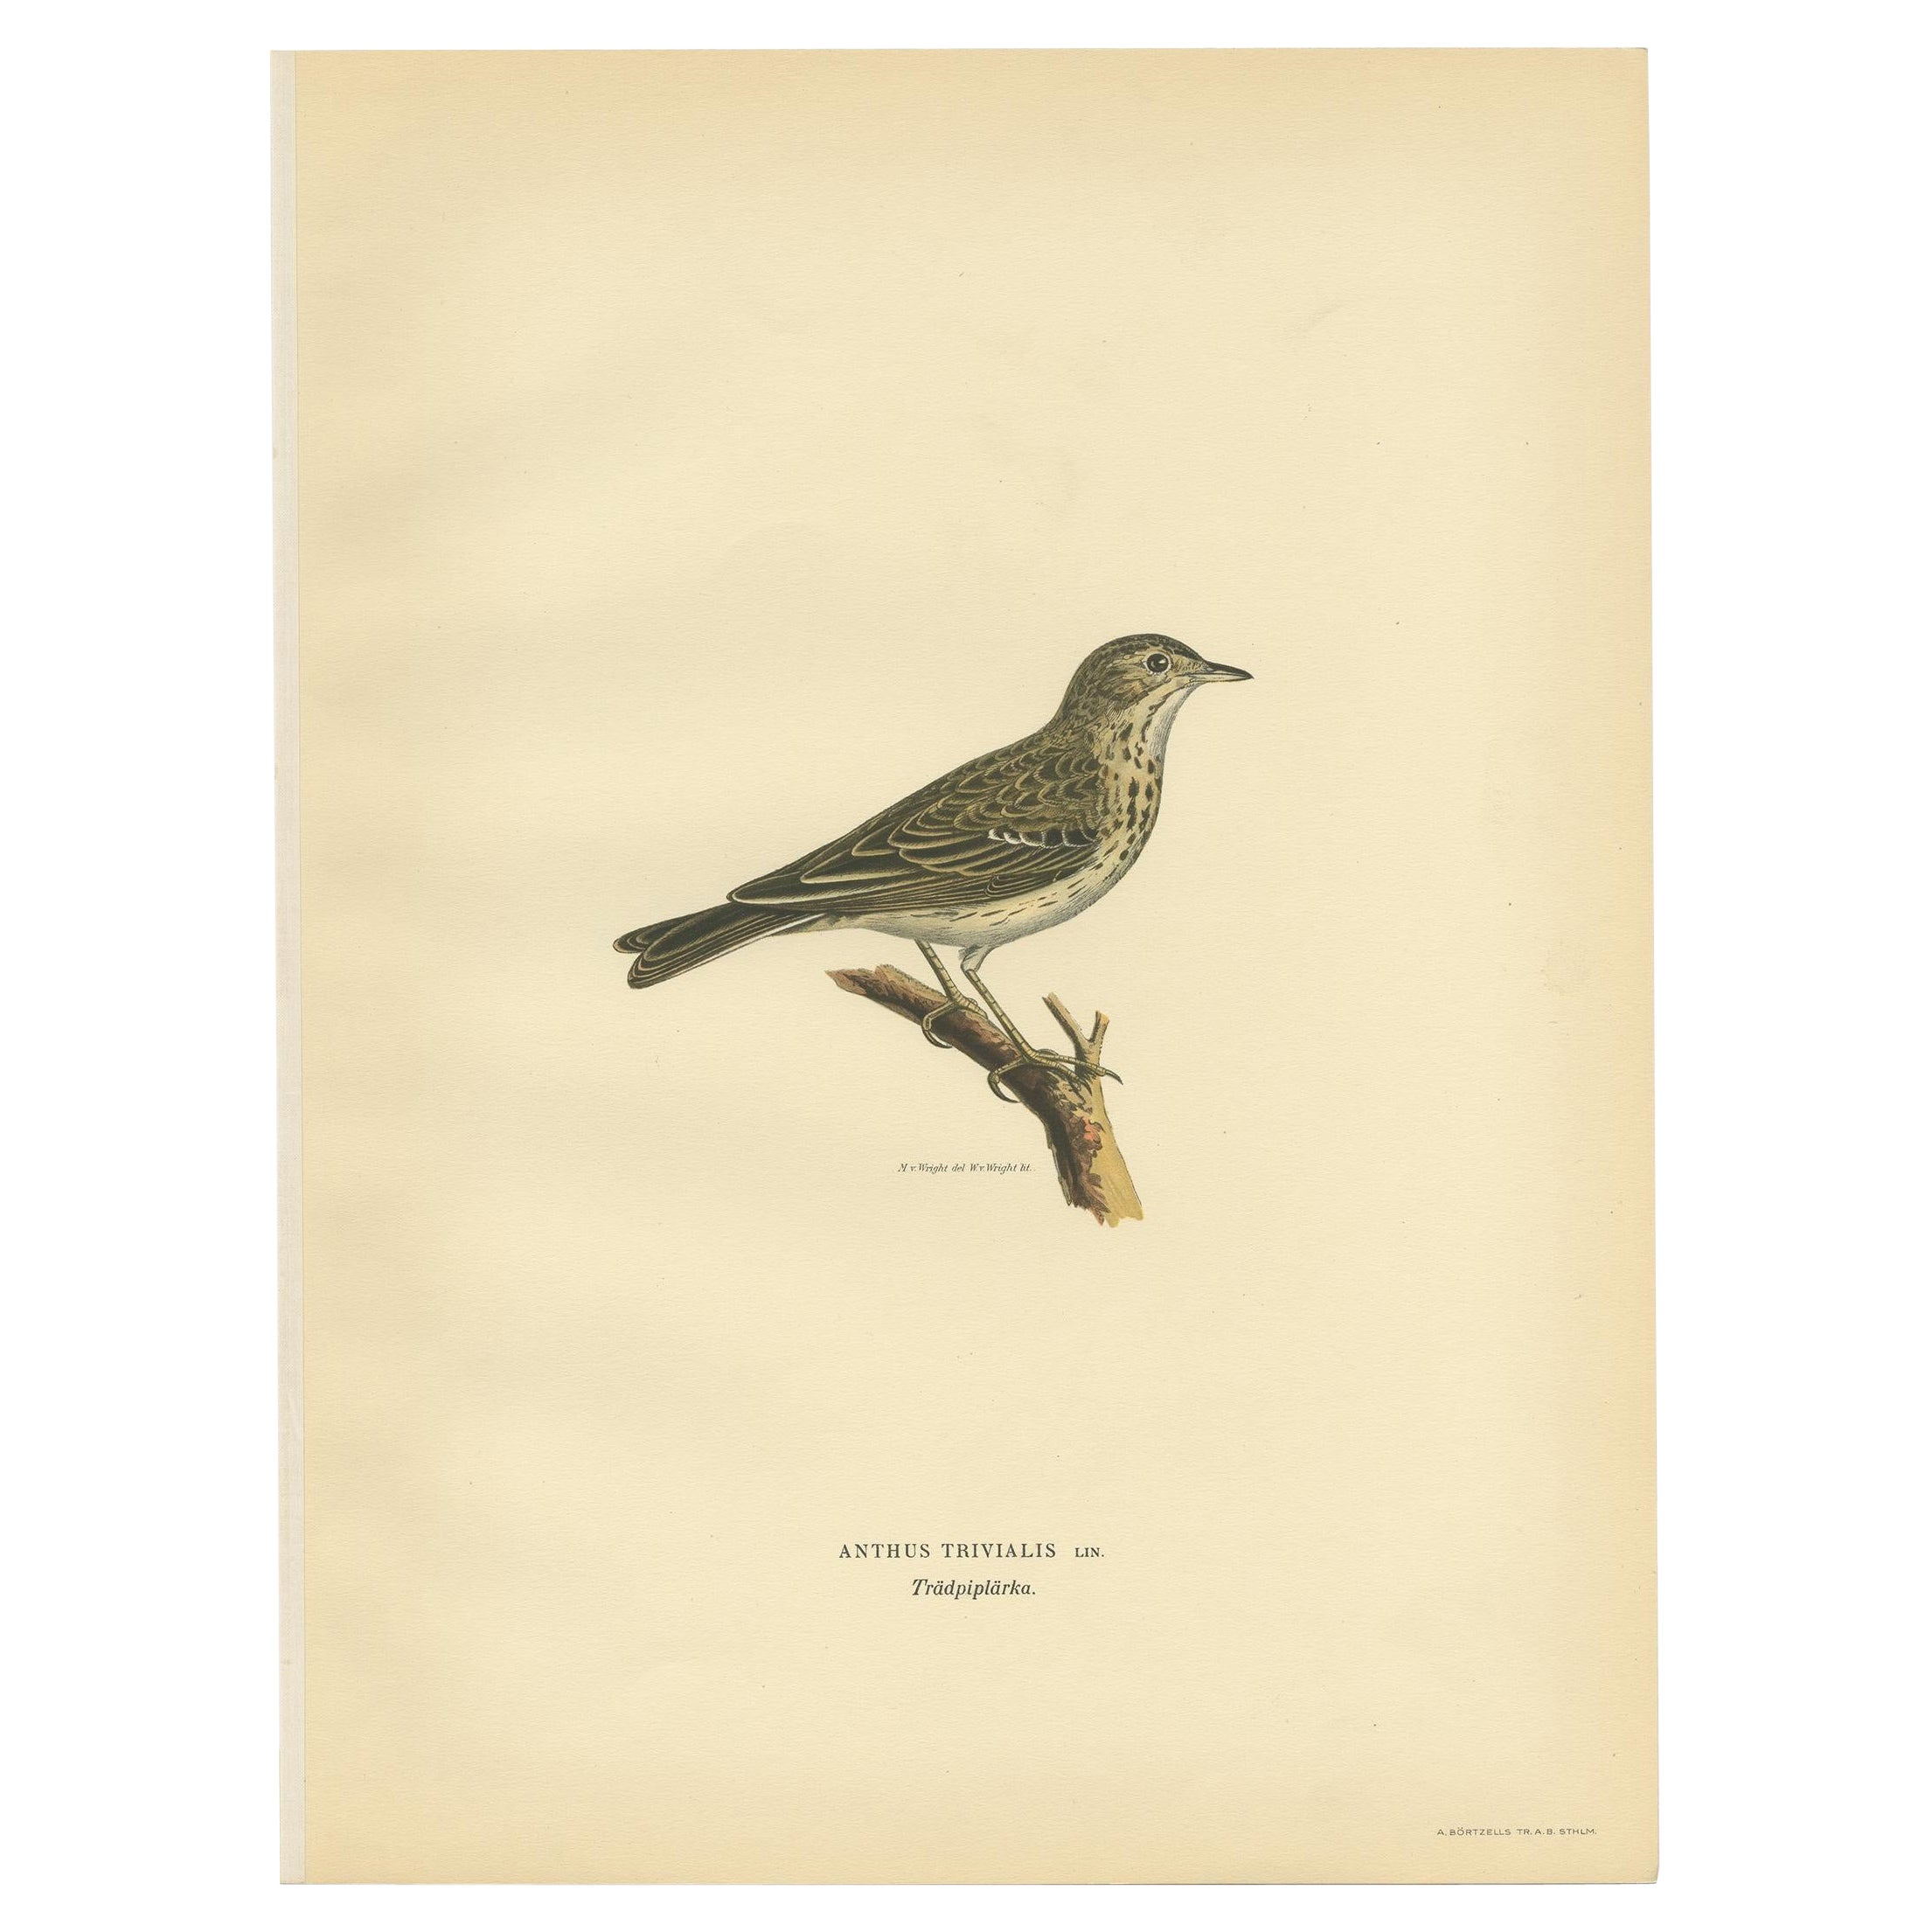 Antique Bird Print of the Tree Pipit by a Swedish Taxidermist, 1927